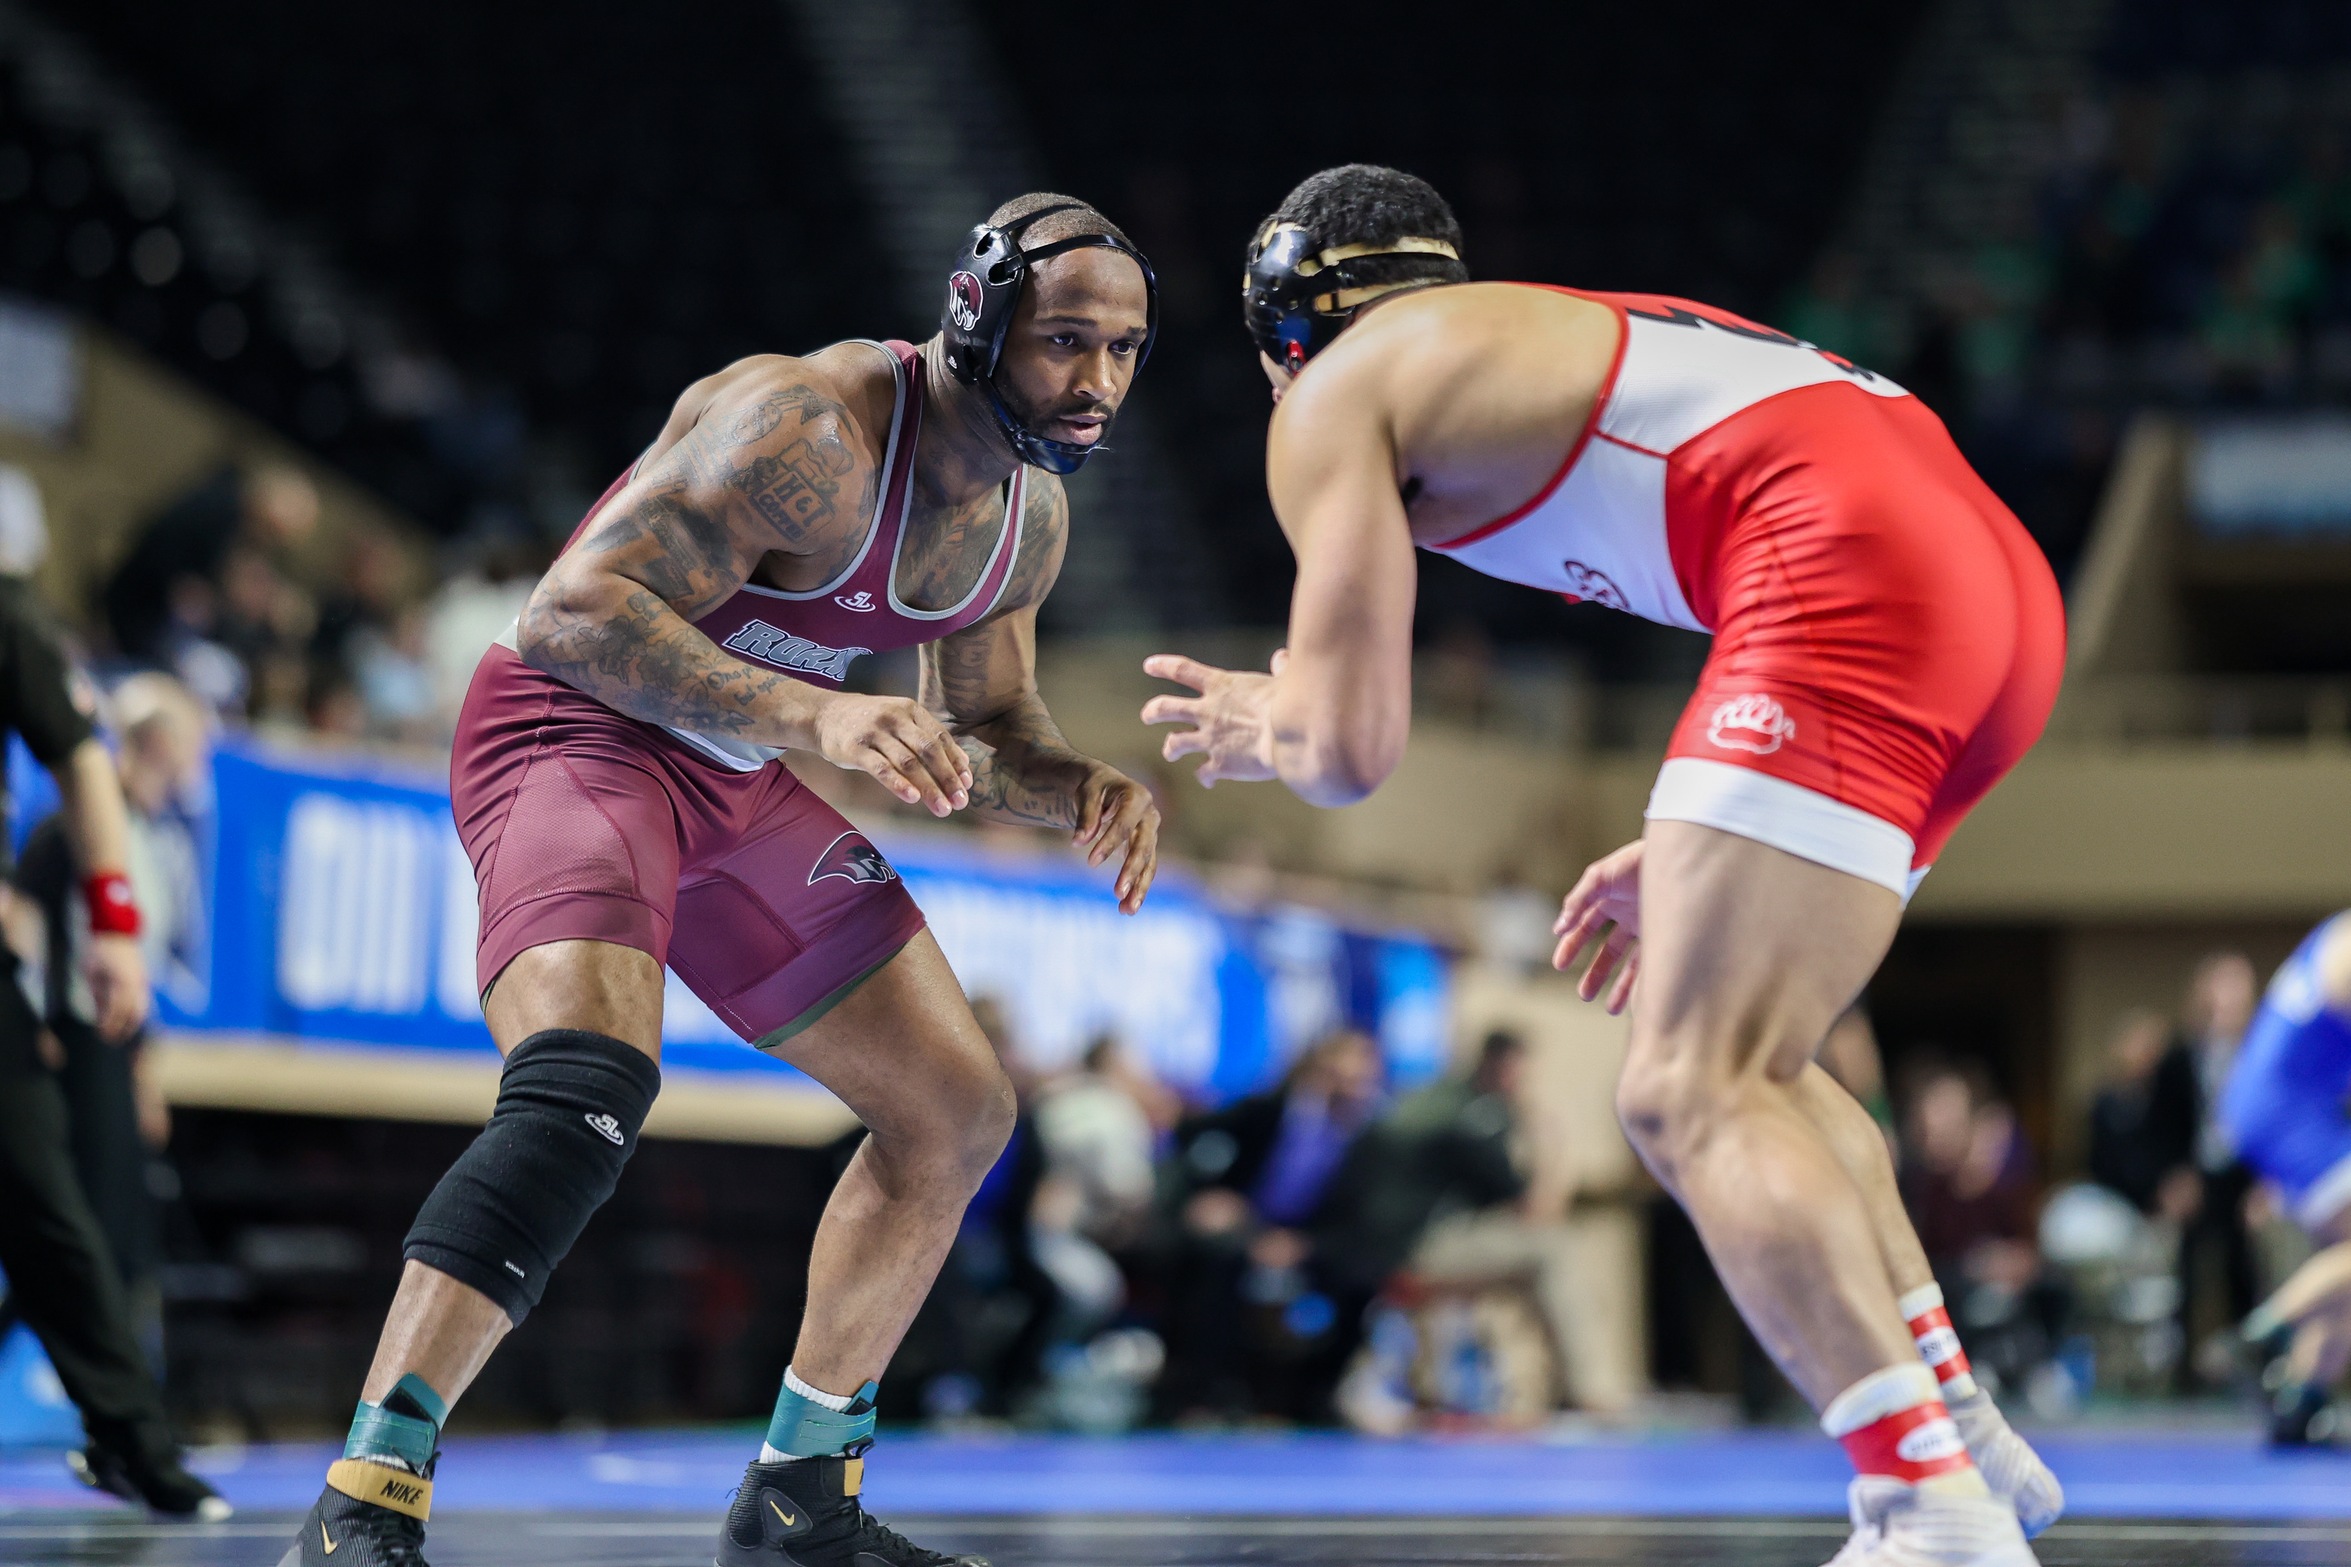 Sallah Finishes Eighth at 2023 NCAA Div. III National Championships